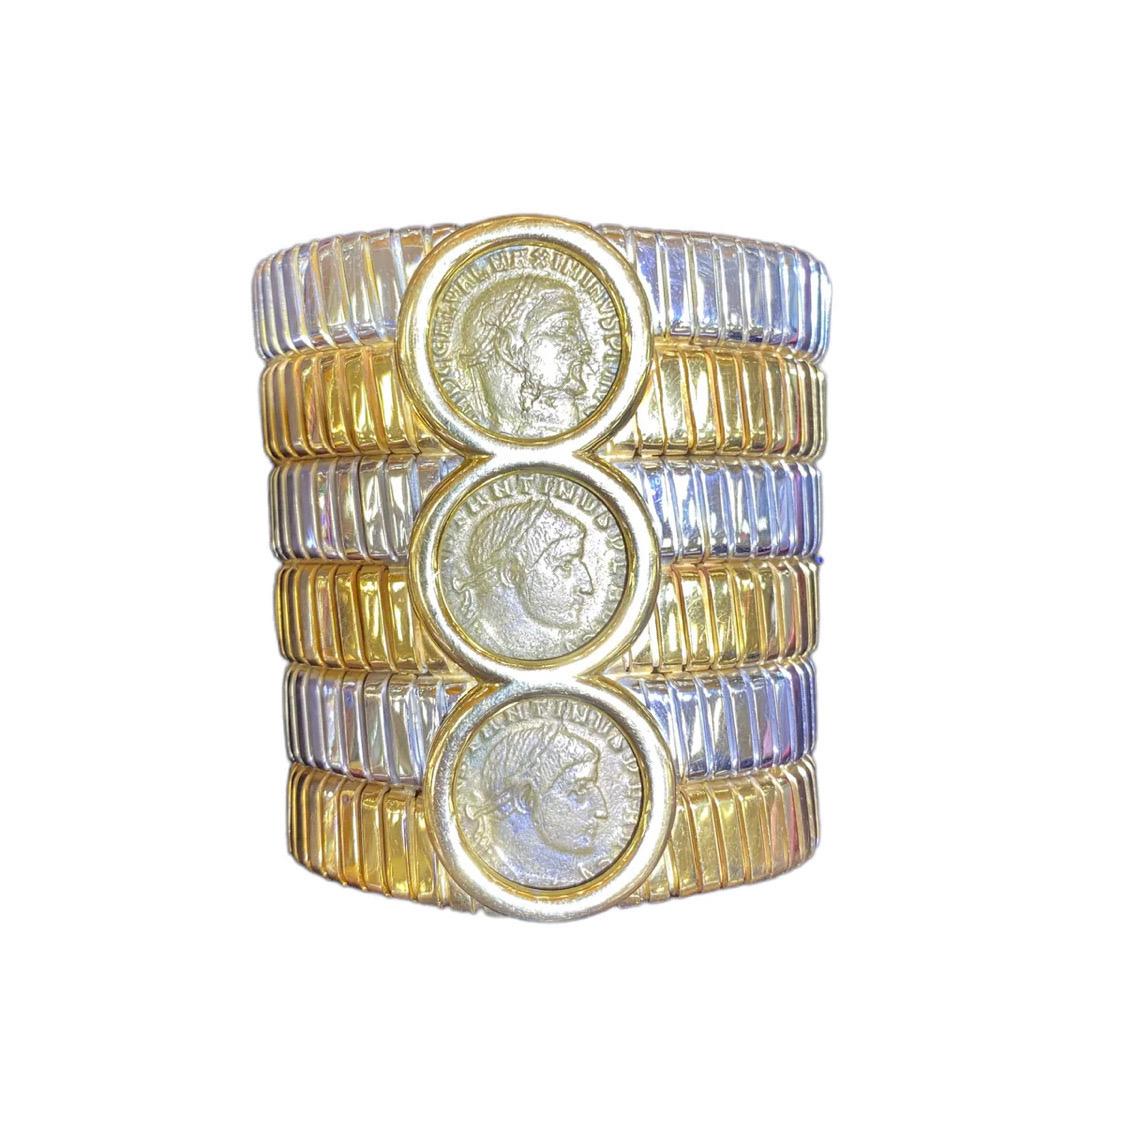 DESIGNER: Bvlgari
MATERIAL: 18k Yellow and White Gold
GEMSTONES: None 
DIMENSIONS: Bracelet will fit approx. 6.75